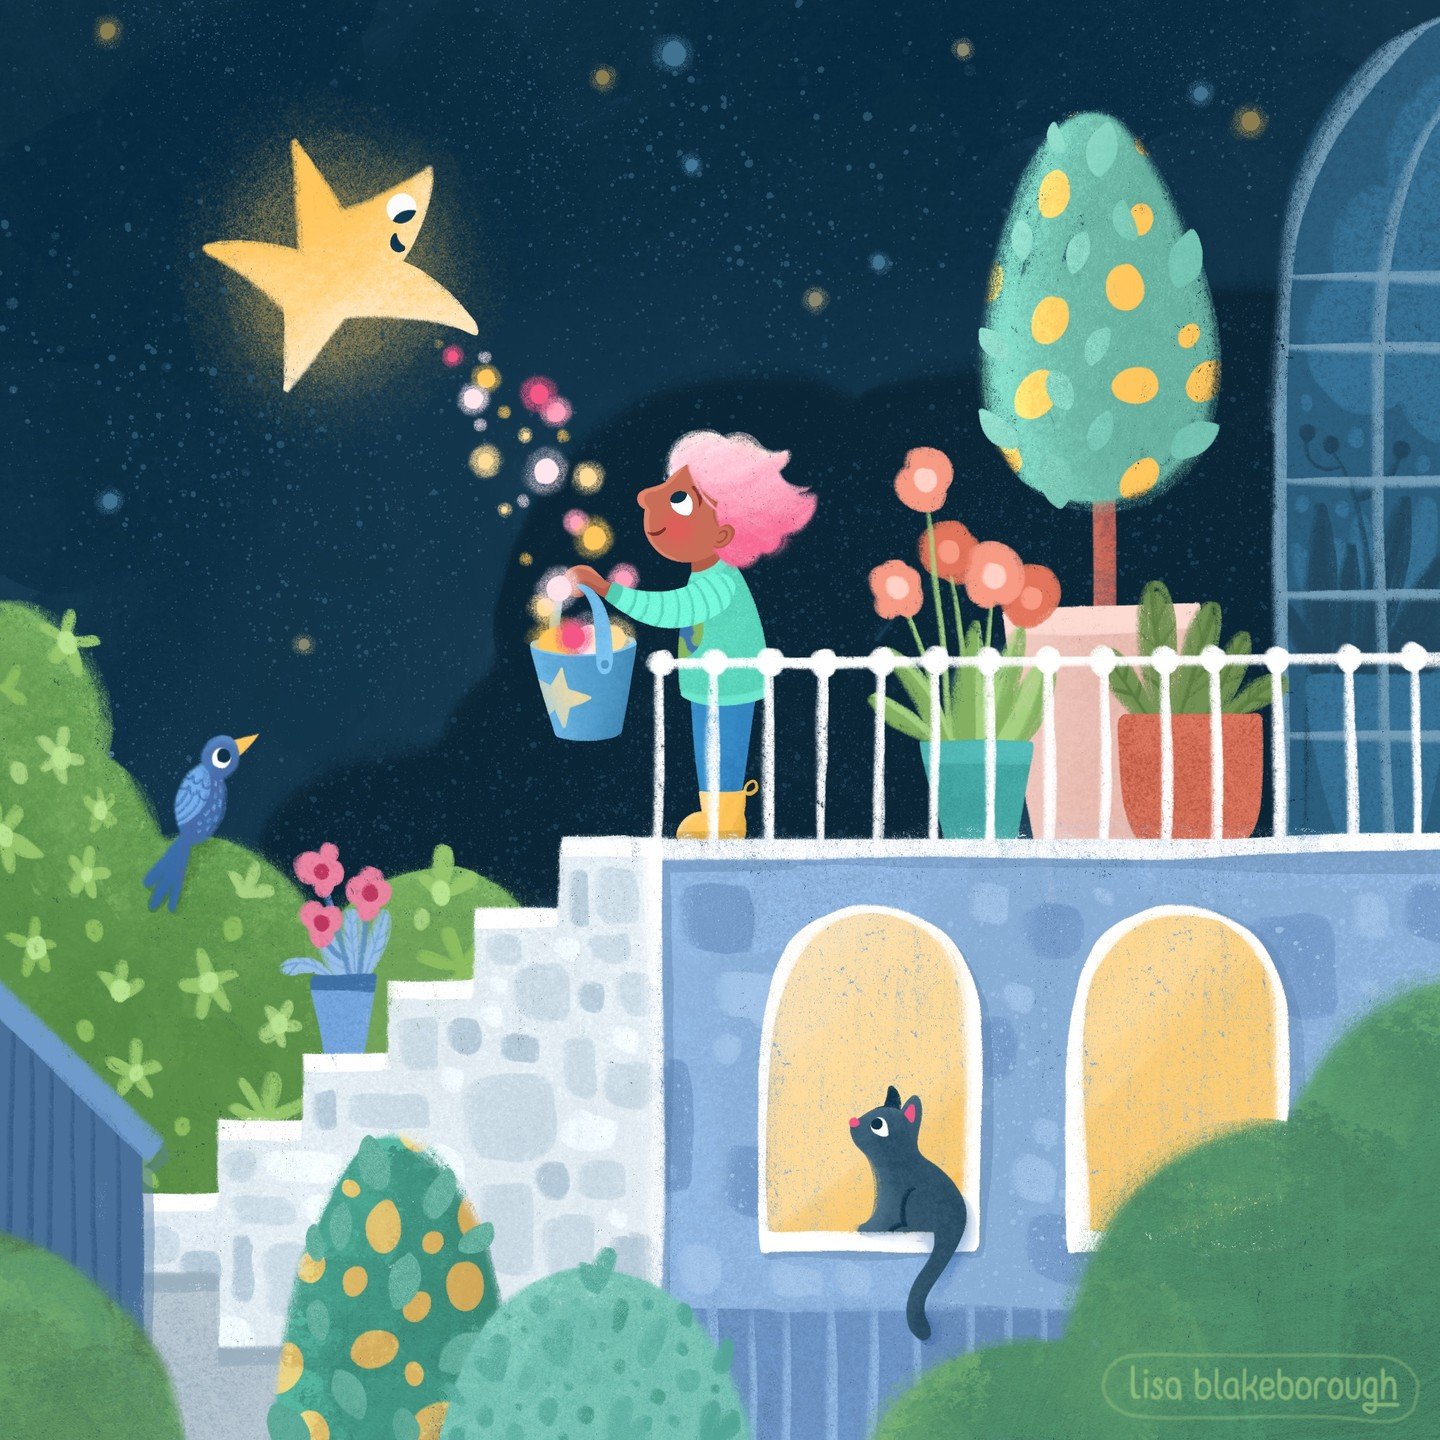 Hello and Happy Earth Day! To celebrate I'm joining #OurPlanetWeek2024!

Today's prompt is: Among the stars 🌟💖 and I'm really enjoying seeing all the beautiful artwork that other artists have created for this great prompt! 

I'll admit that this wh